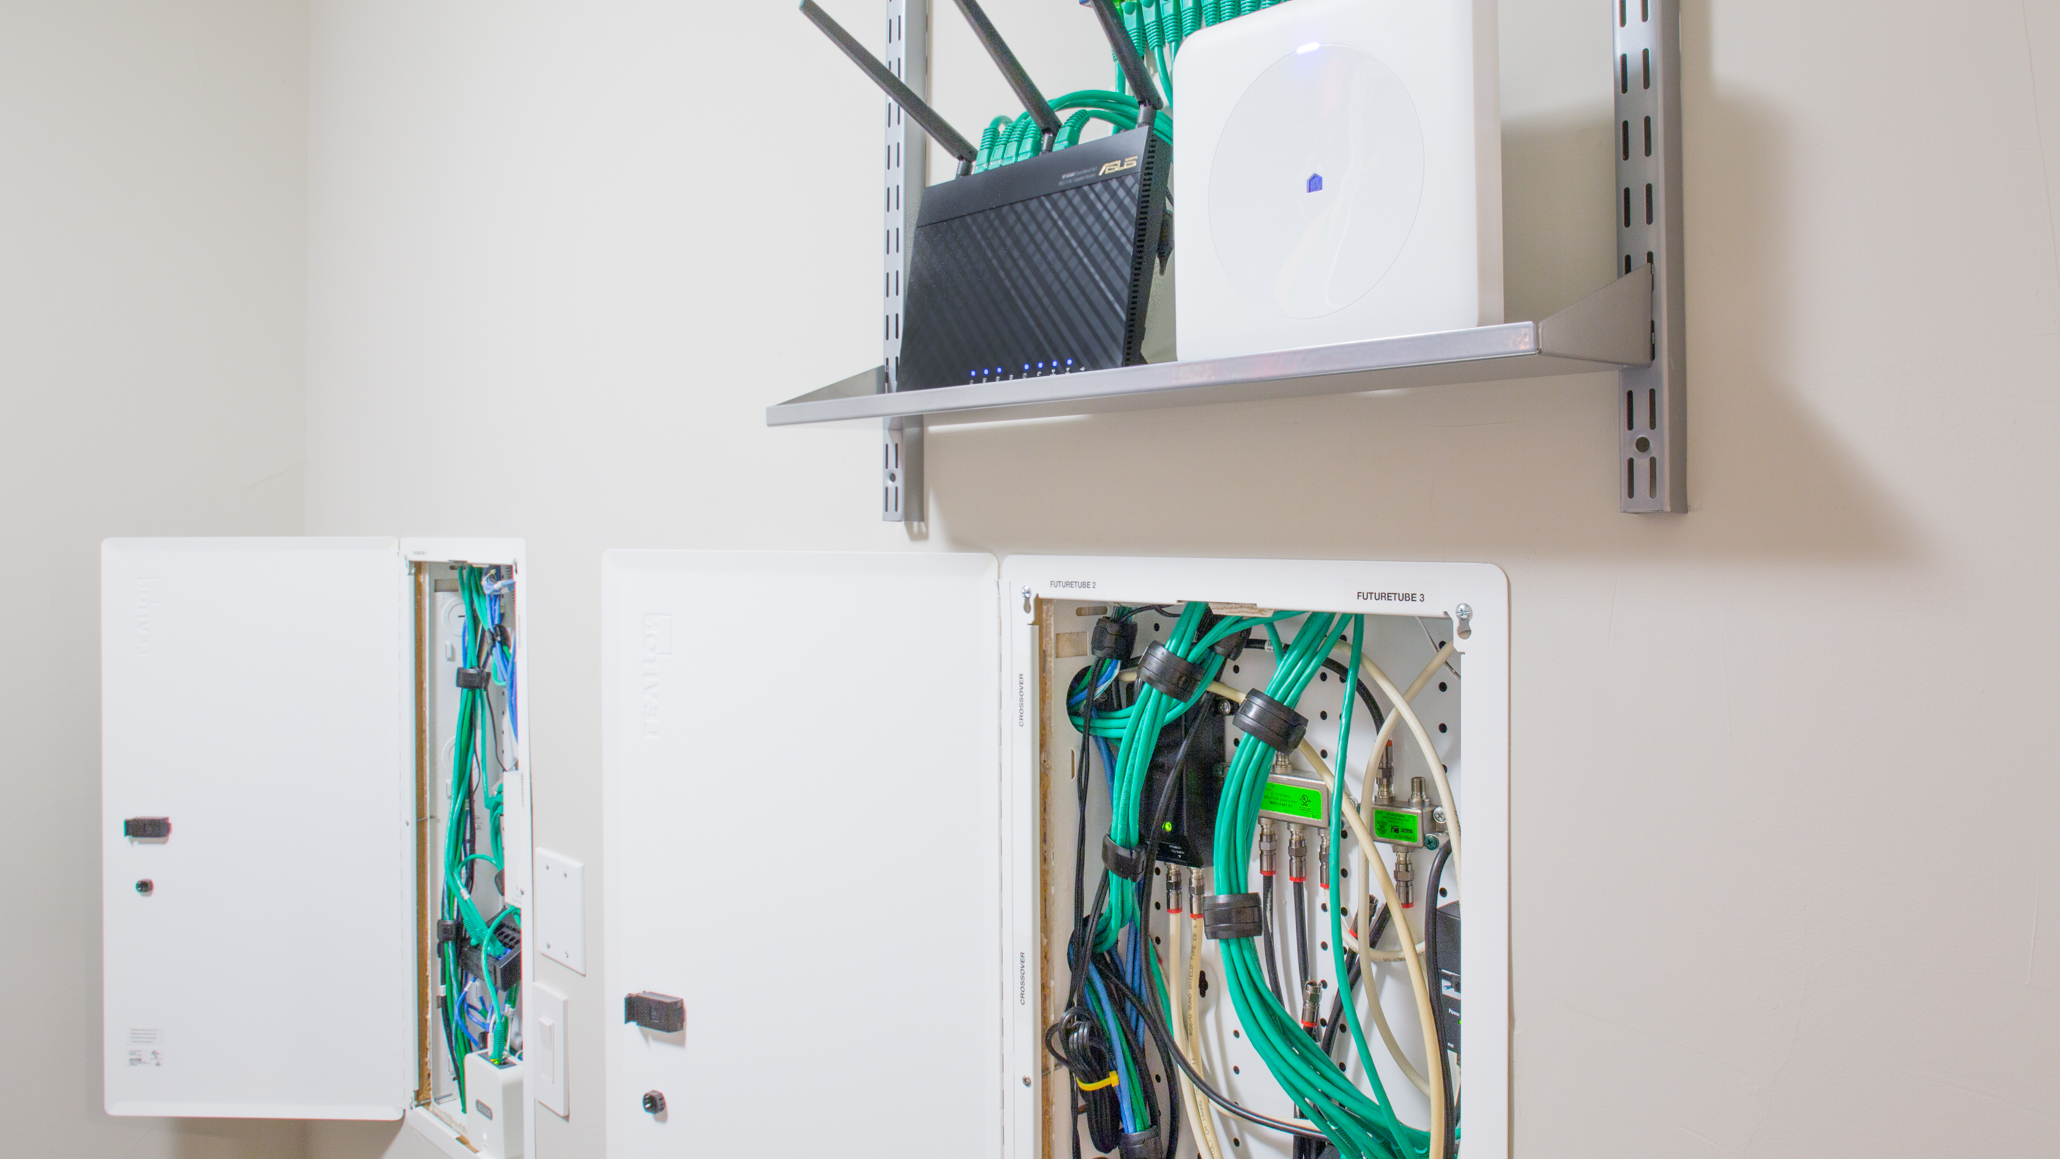 Structured Media Enclosure, Home Network Wiring Cabinet